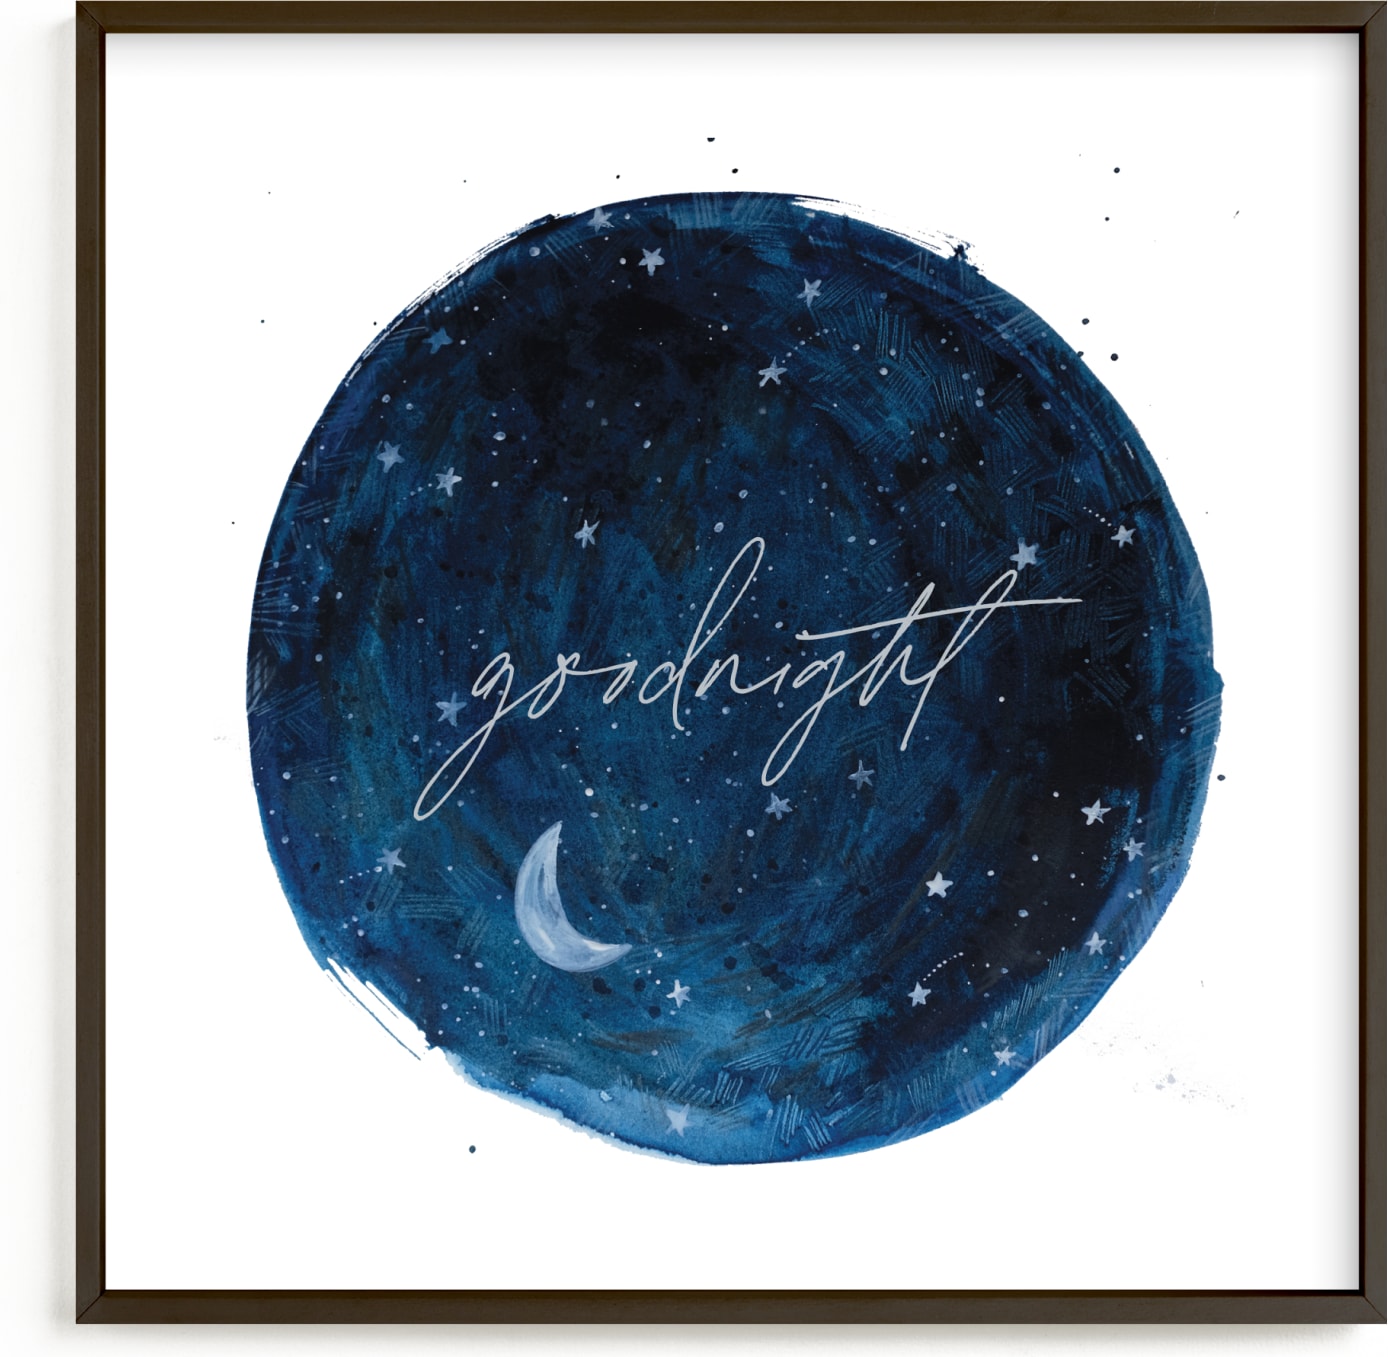 This is a blue nursery wall art by Krissy Bengtson called Constellations.